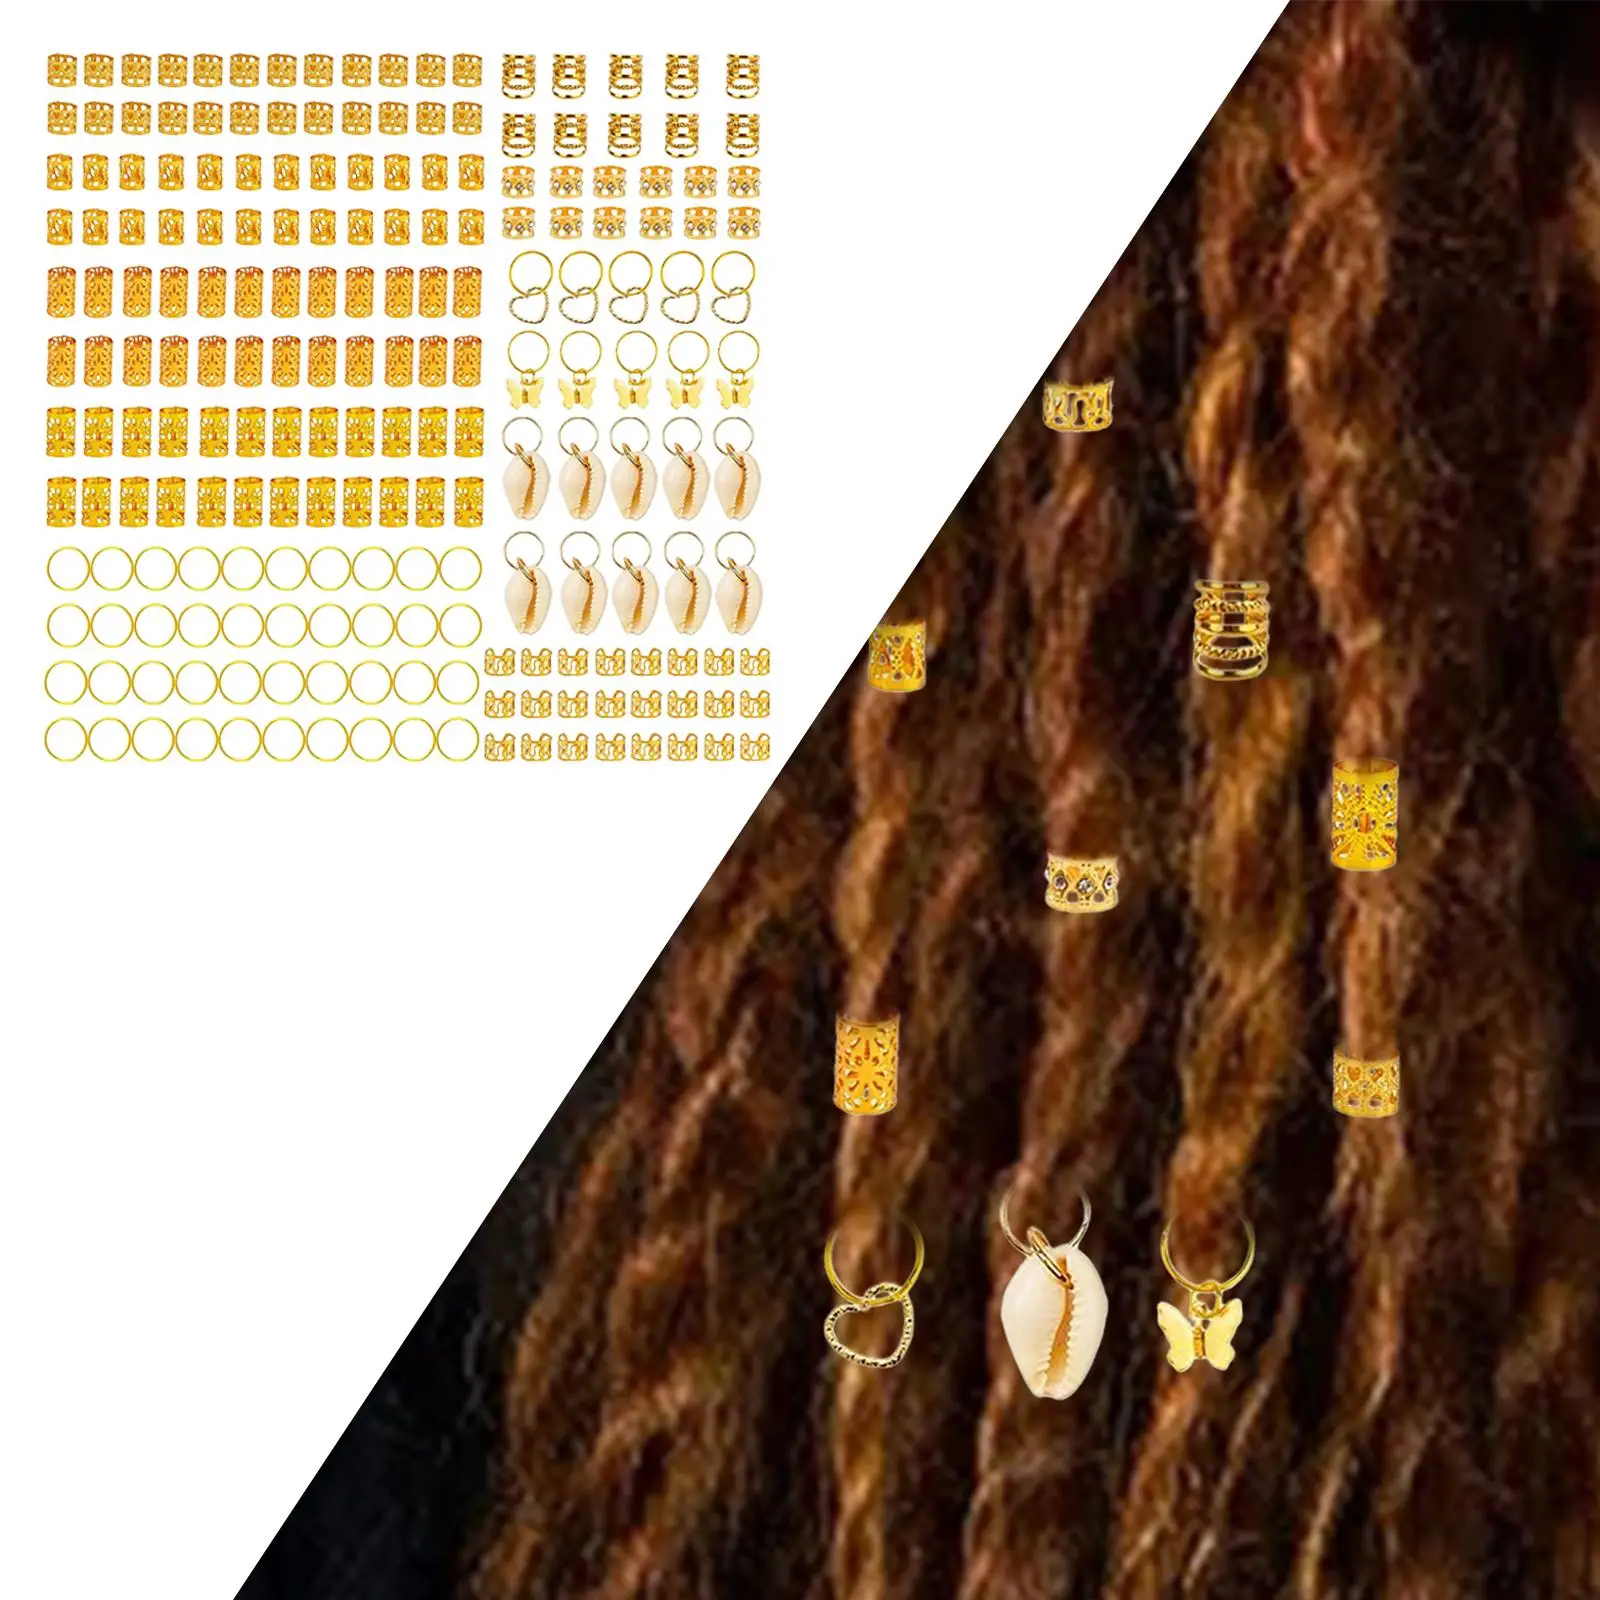 202x Hair Rings Pendants Charms Alloy Decorative Hair Coil Dreadlocks for Bridal Prom Women Party Fashion Show Hair Decorations